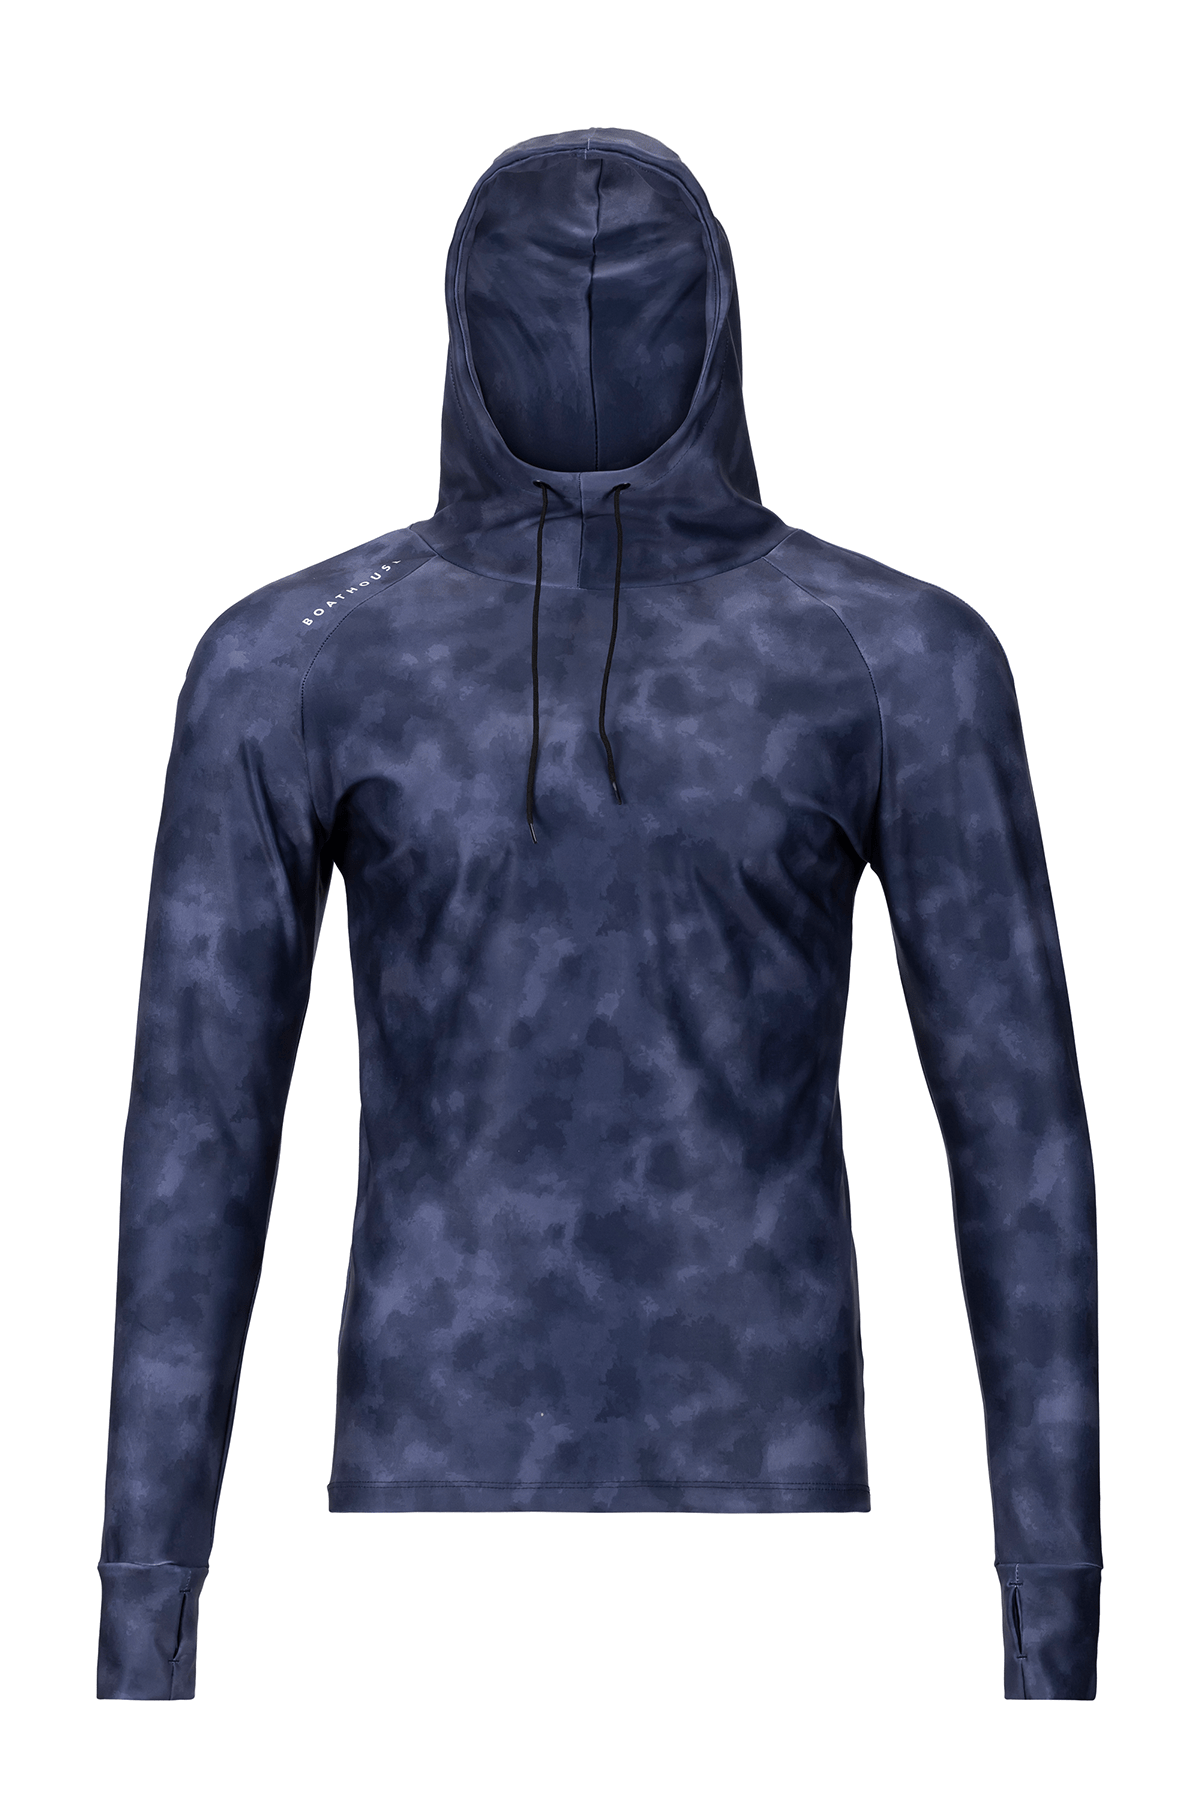 BOATHOUSE Men's 215 Printed Hooded Compression Top